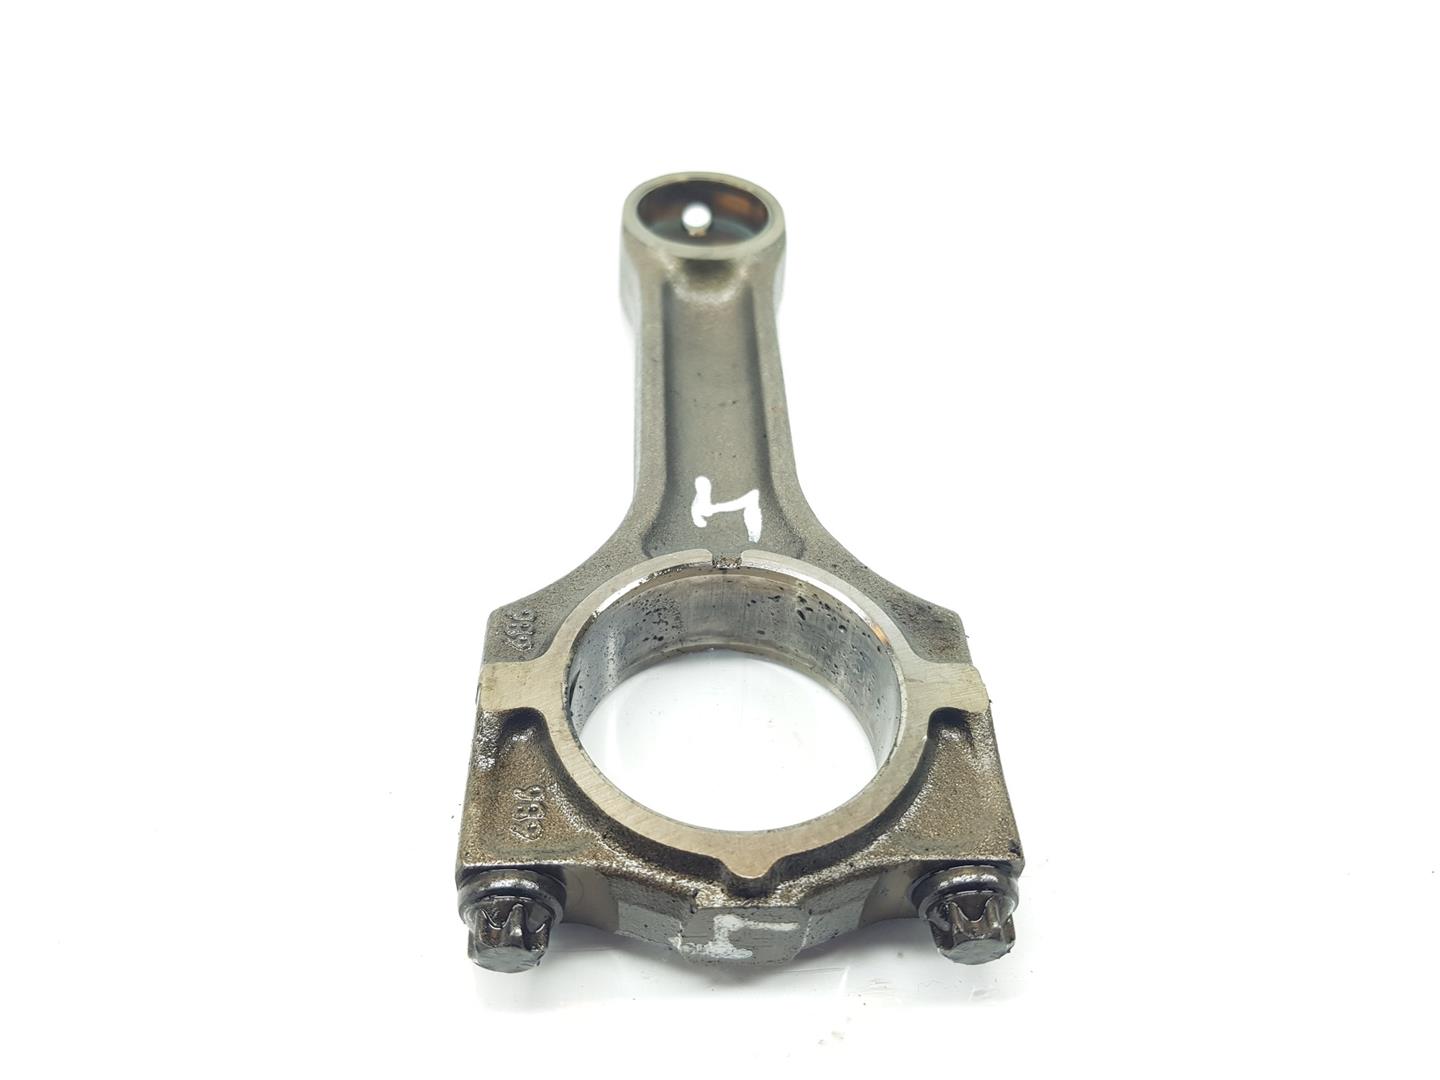 BMW 3 Series E46 (1997-2006) Connecting Rod 11242247518, 2247518, 1111AA 24175394